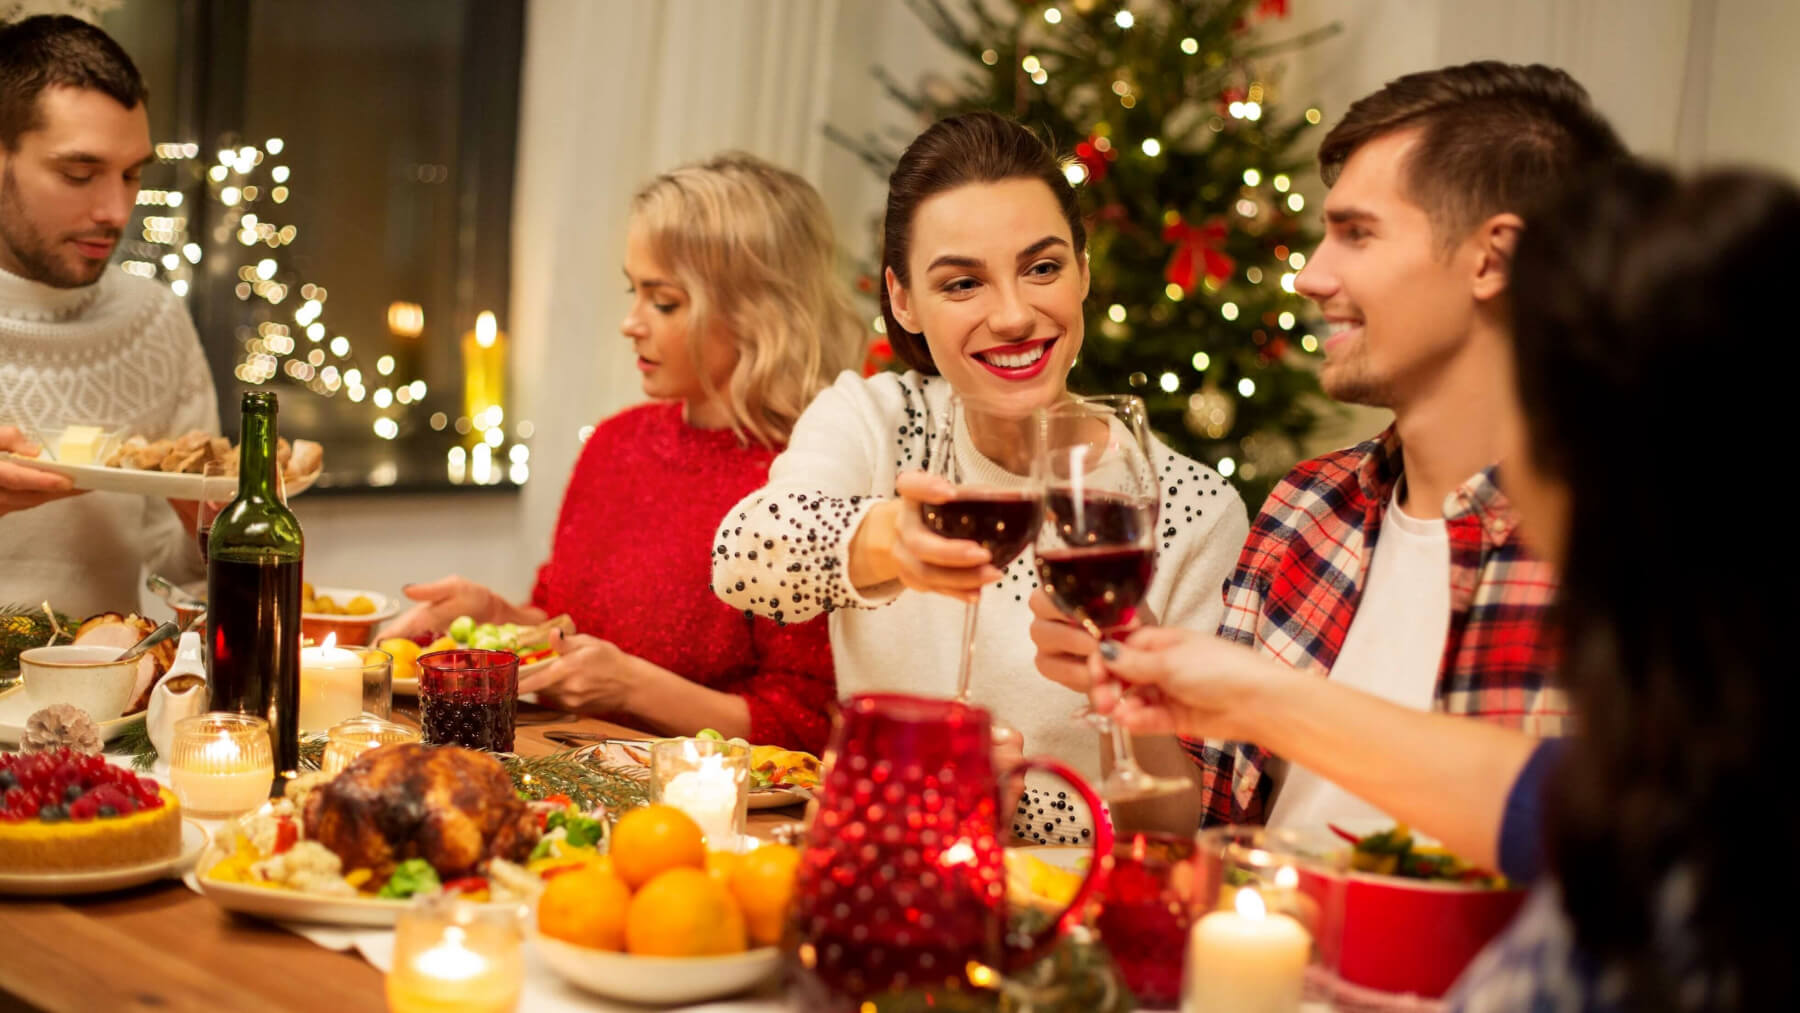 Partners in Wine: CHRISTMAS WINE TASTER WANTED